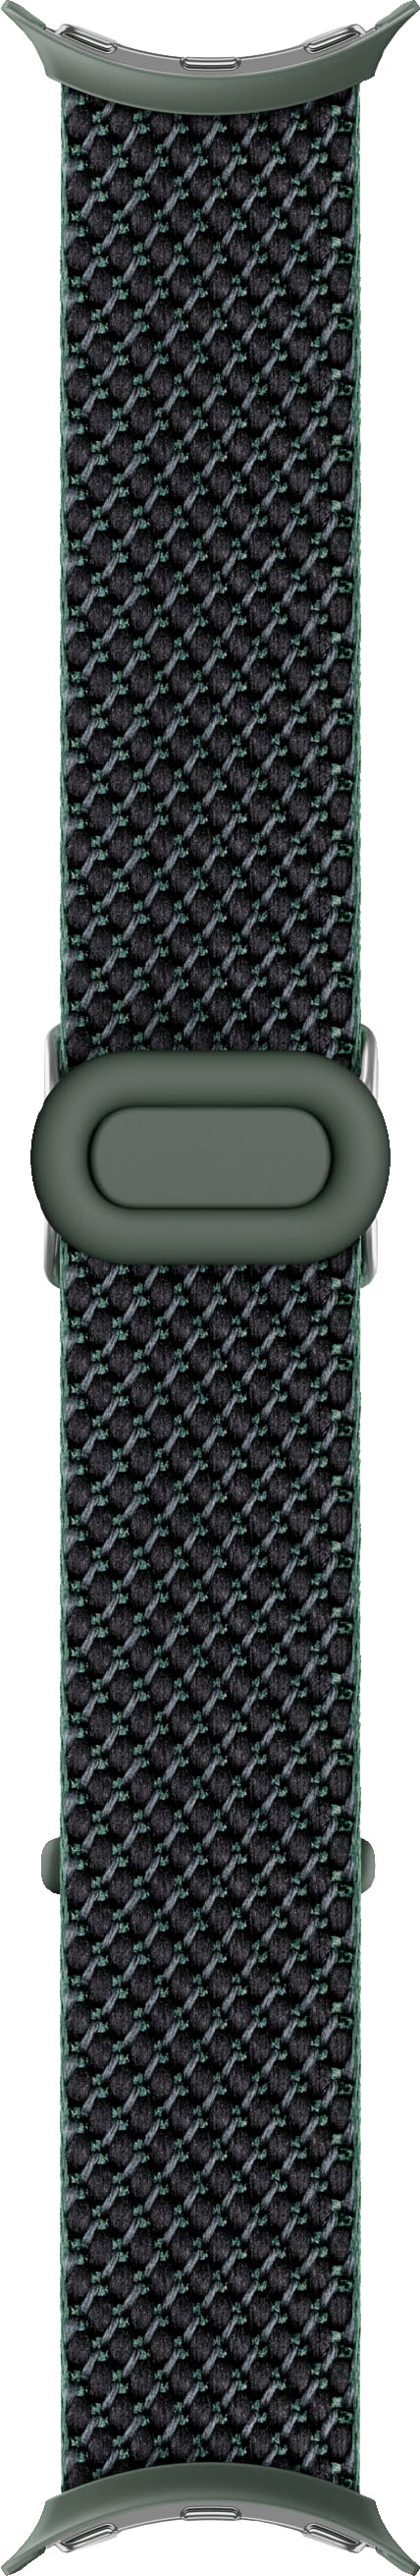 Google Woven Size One Buy - Band, Best GA03270-WW Ivy